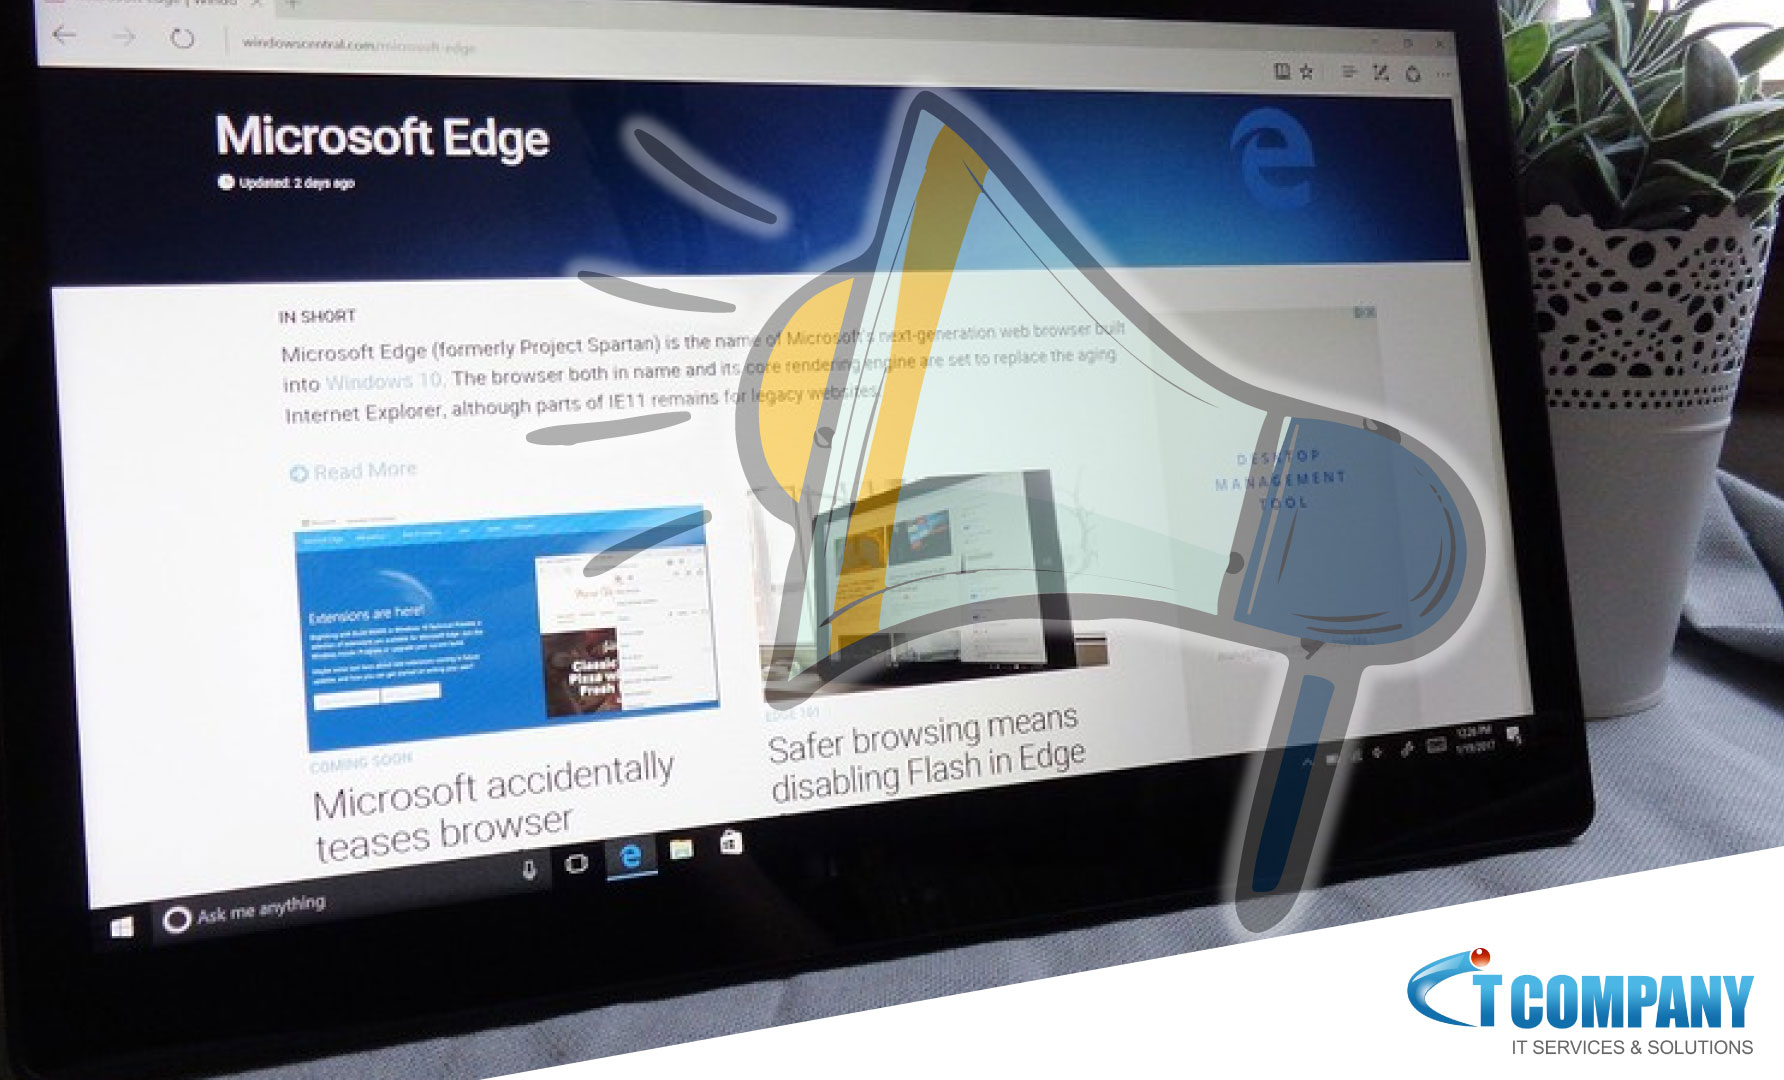 Microsoft Edge is bombarding users with advertisements